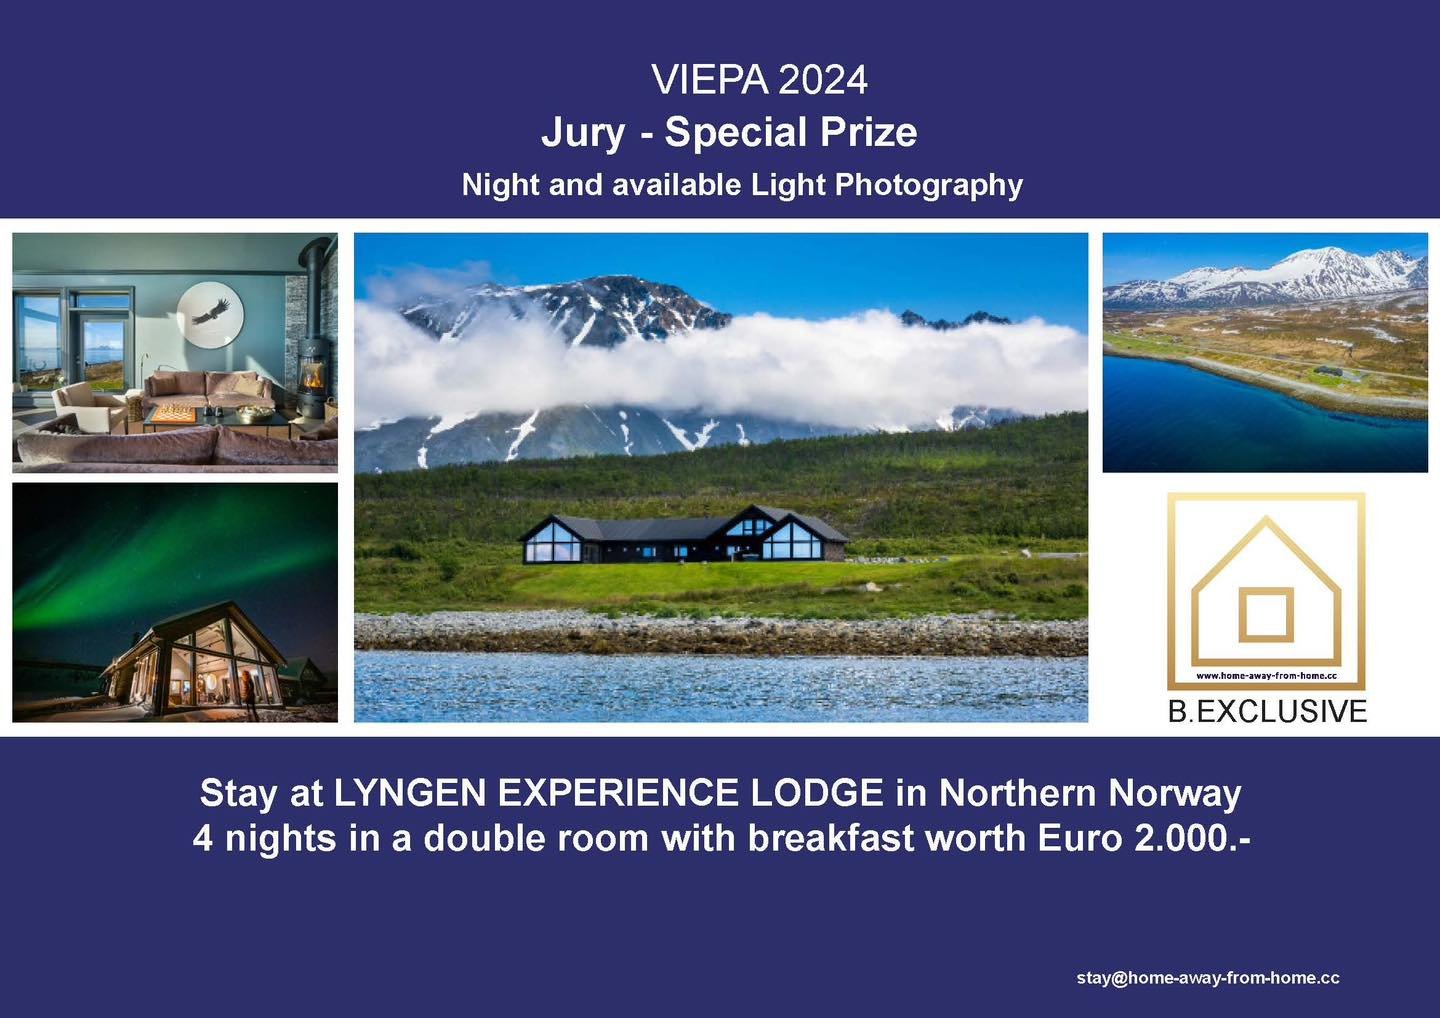 The winner of the special prize in the &quot;Available Light&quot; category will be rewarded with an outstanding prize. A stay worth &euro;2,000 at the breathtaking Lyngen Lodge in Norway awaits the lucky winner. 

Jury - Special Prize Night and avai